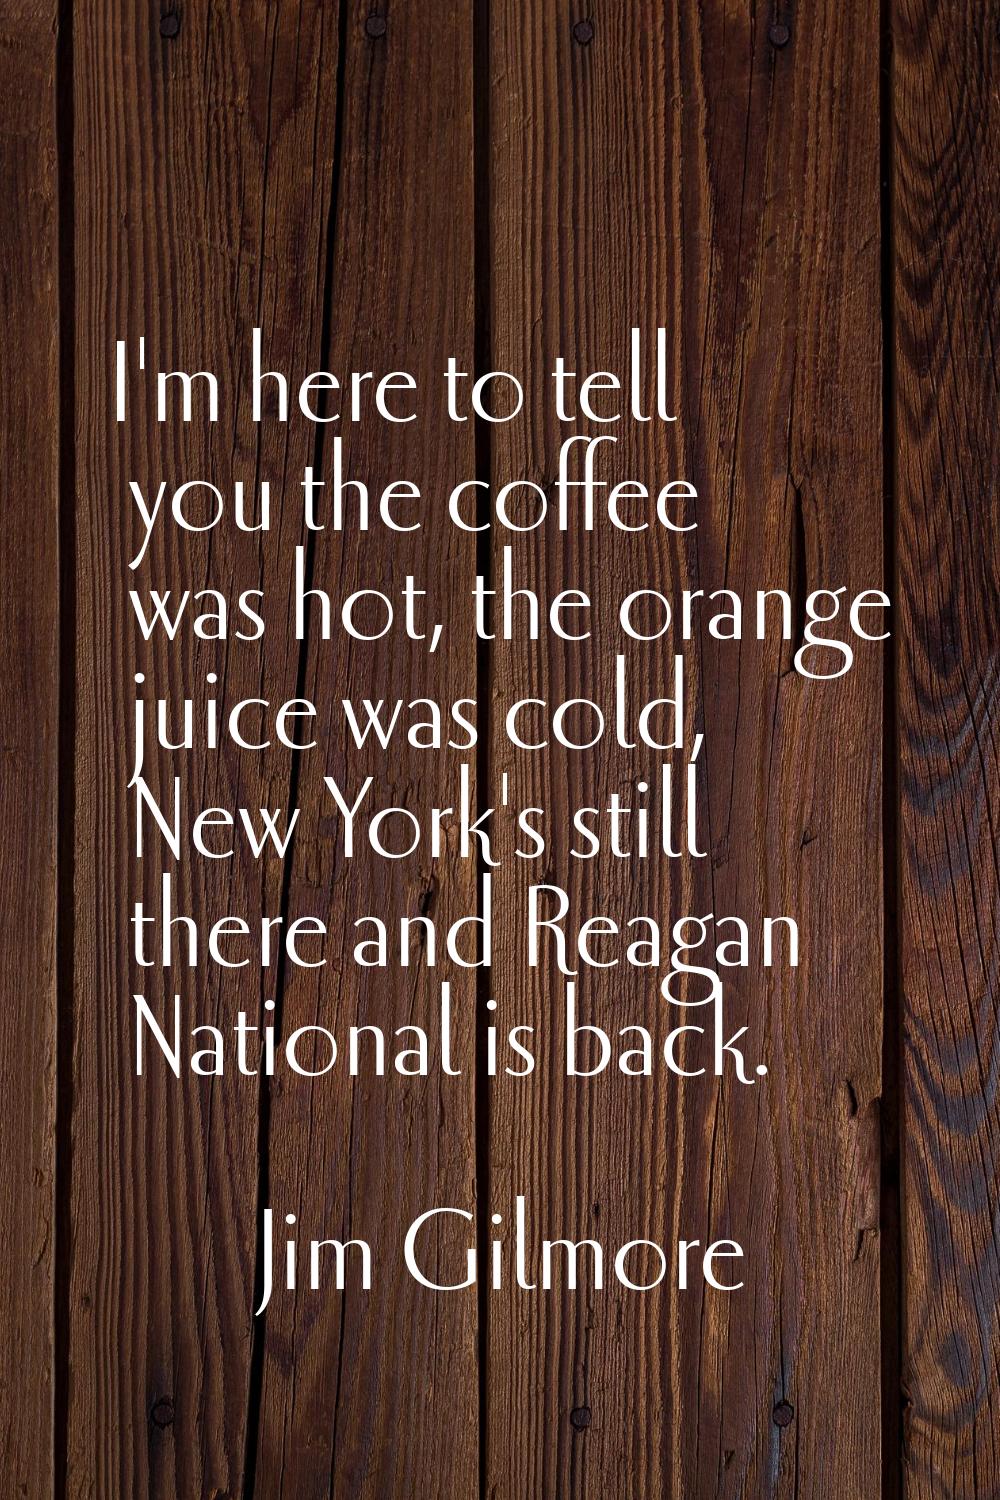 I'm here to tell you the coffee was hot, the orange juice was cold, New York's still there and Reag